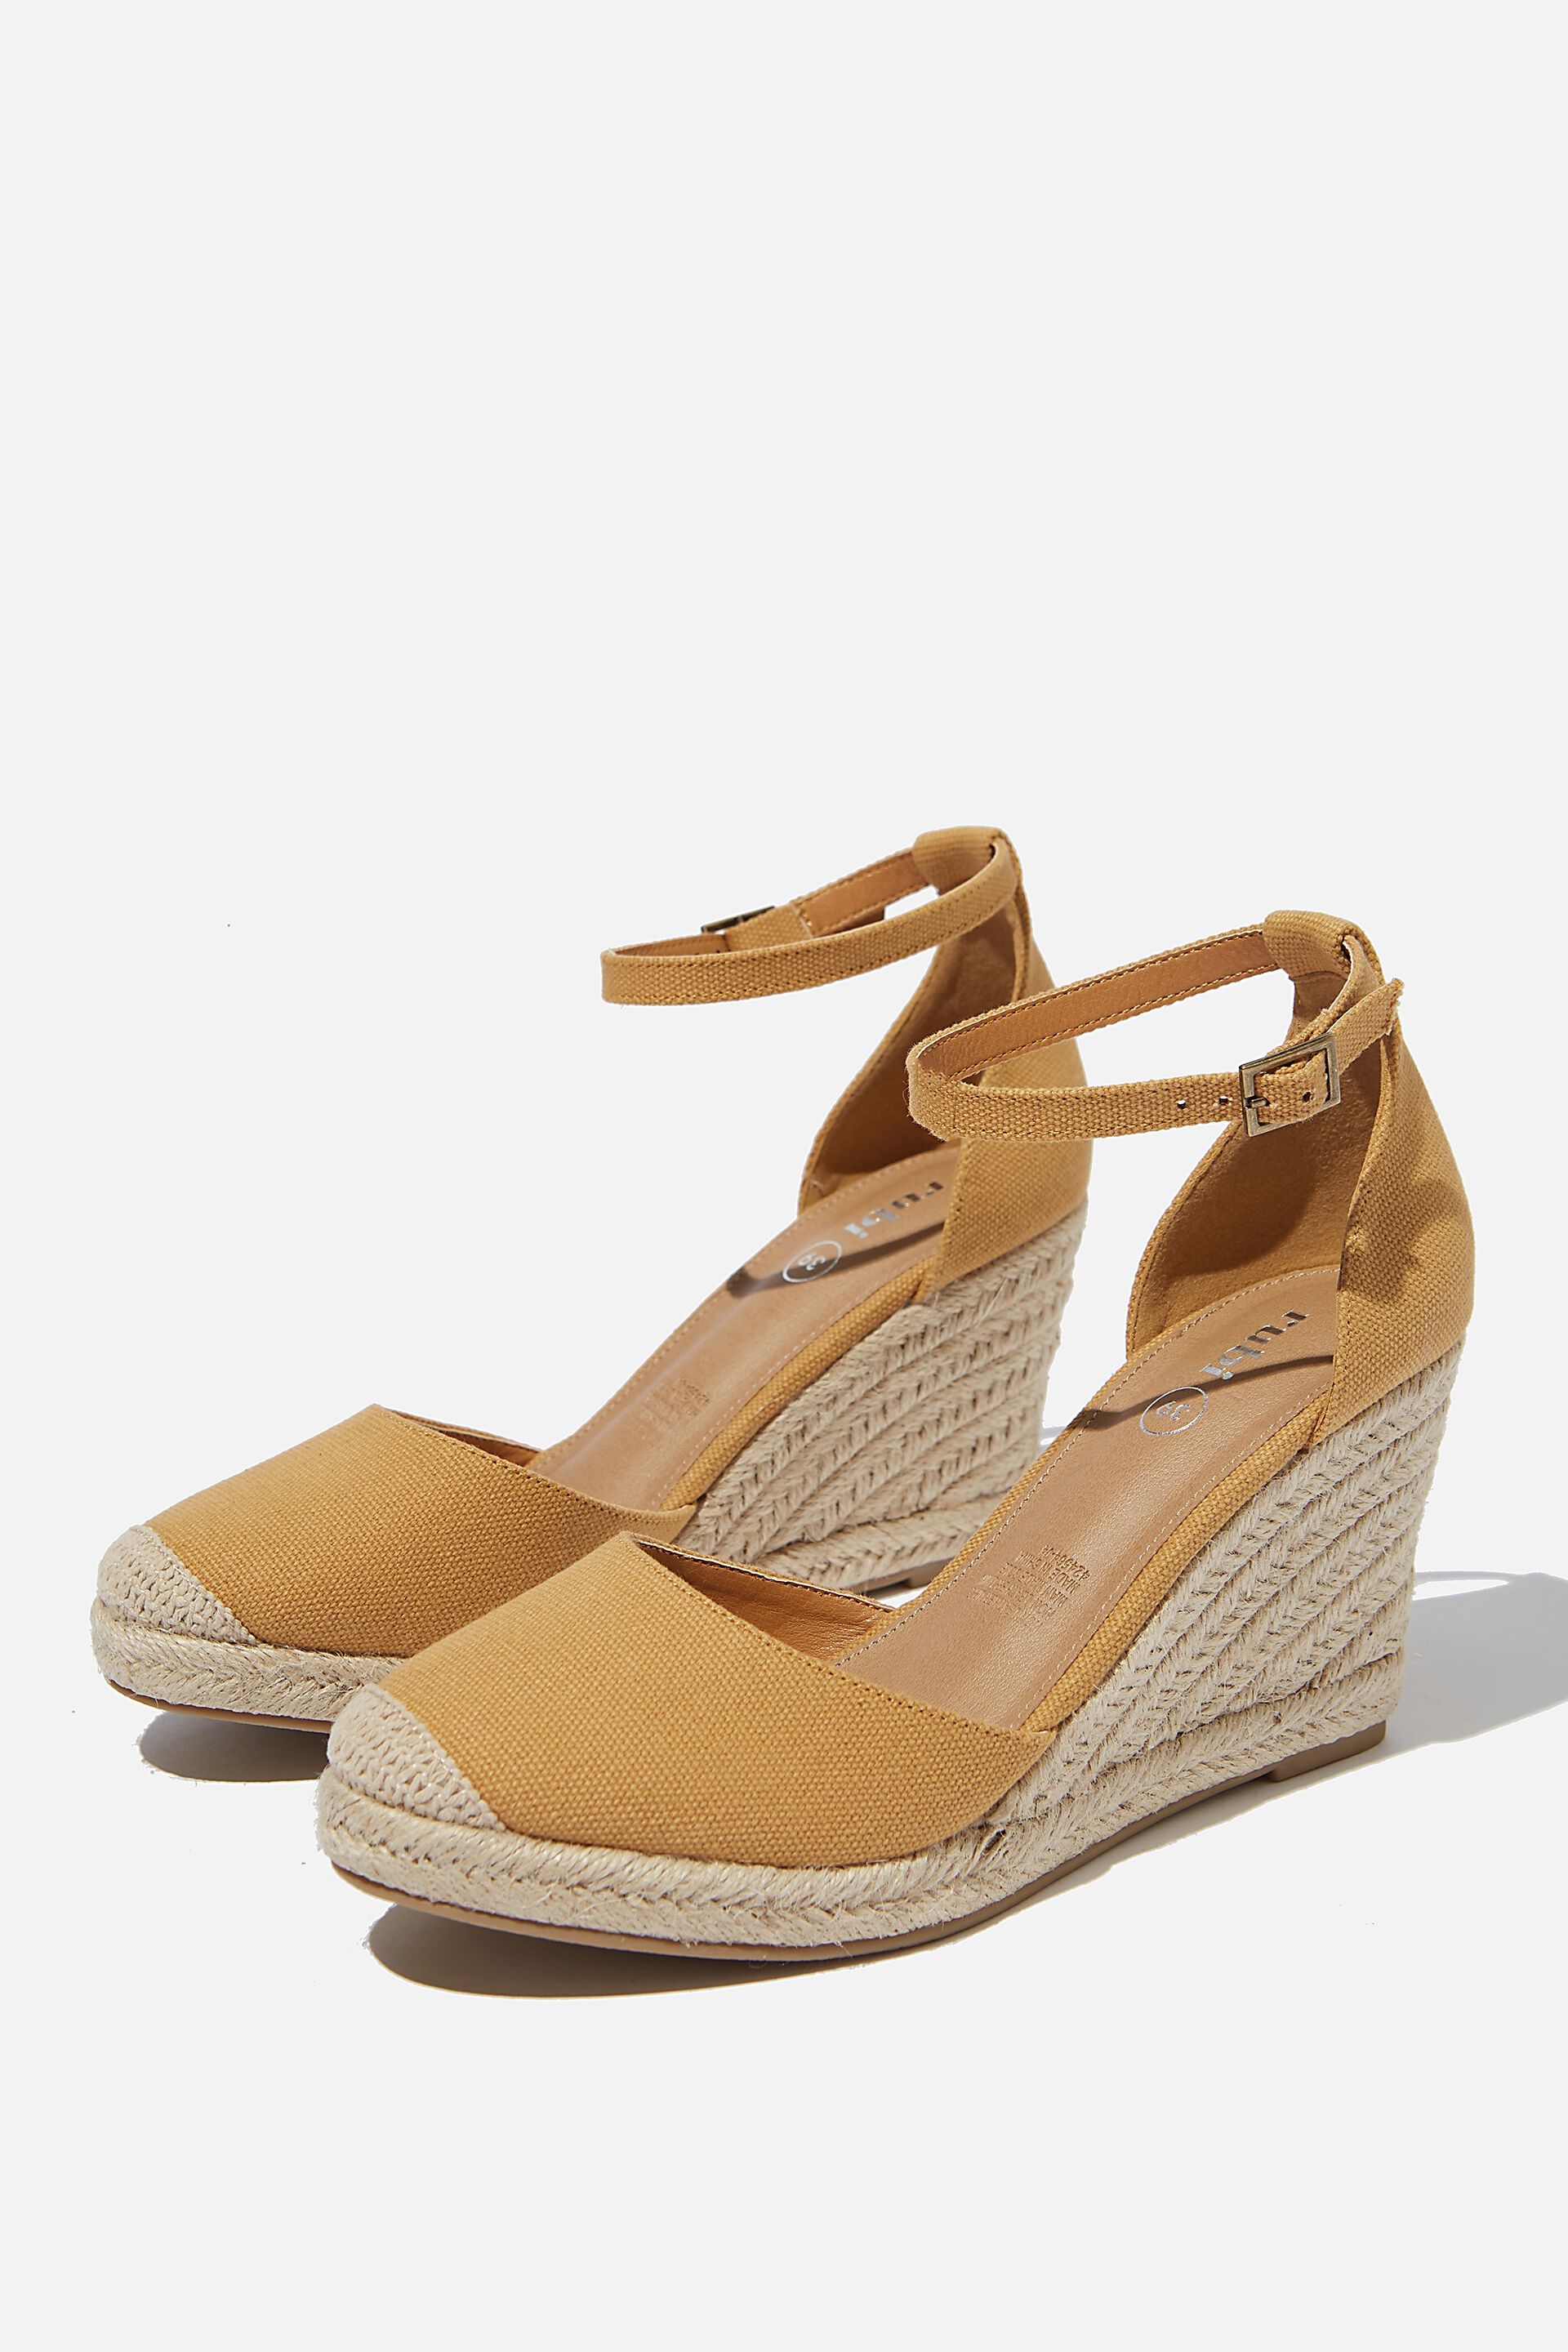 Florence Closed Toe Wedge | Women's 